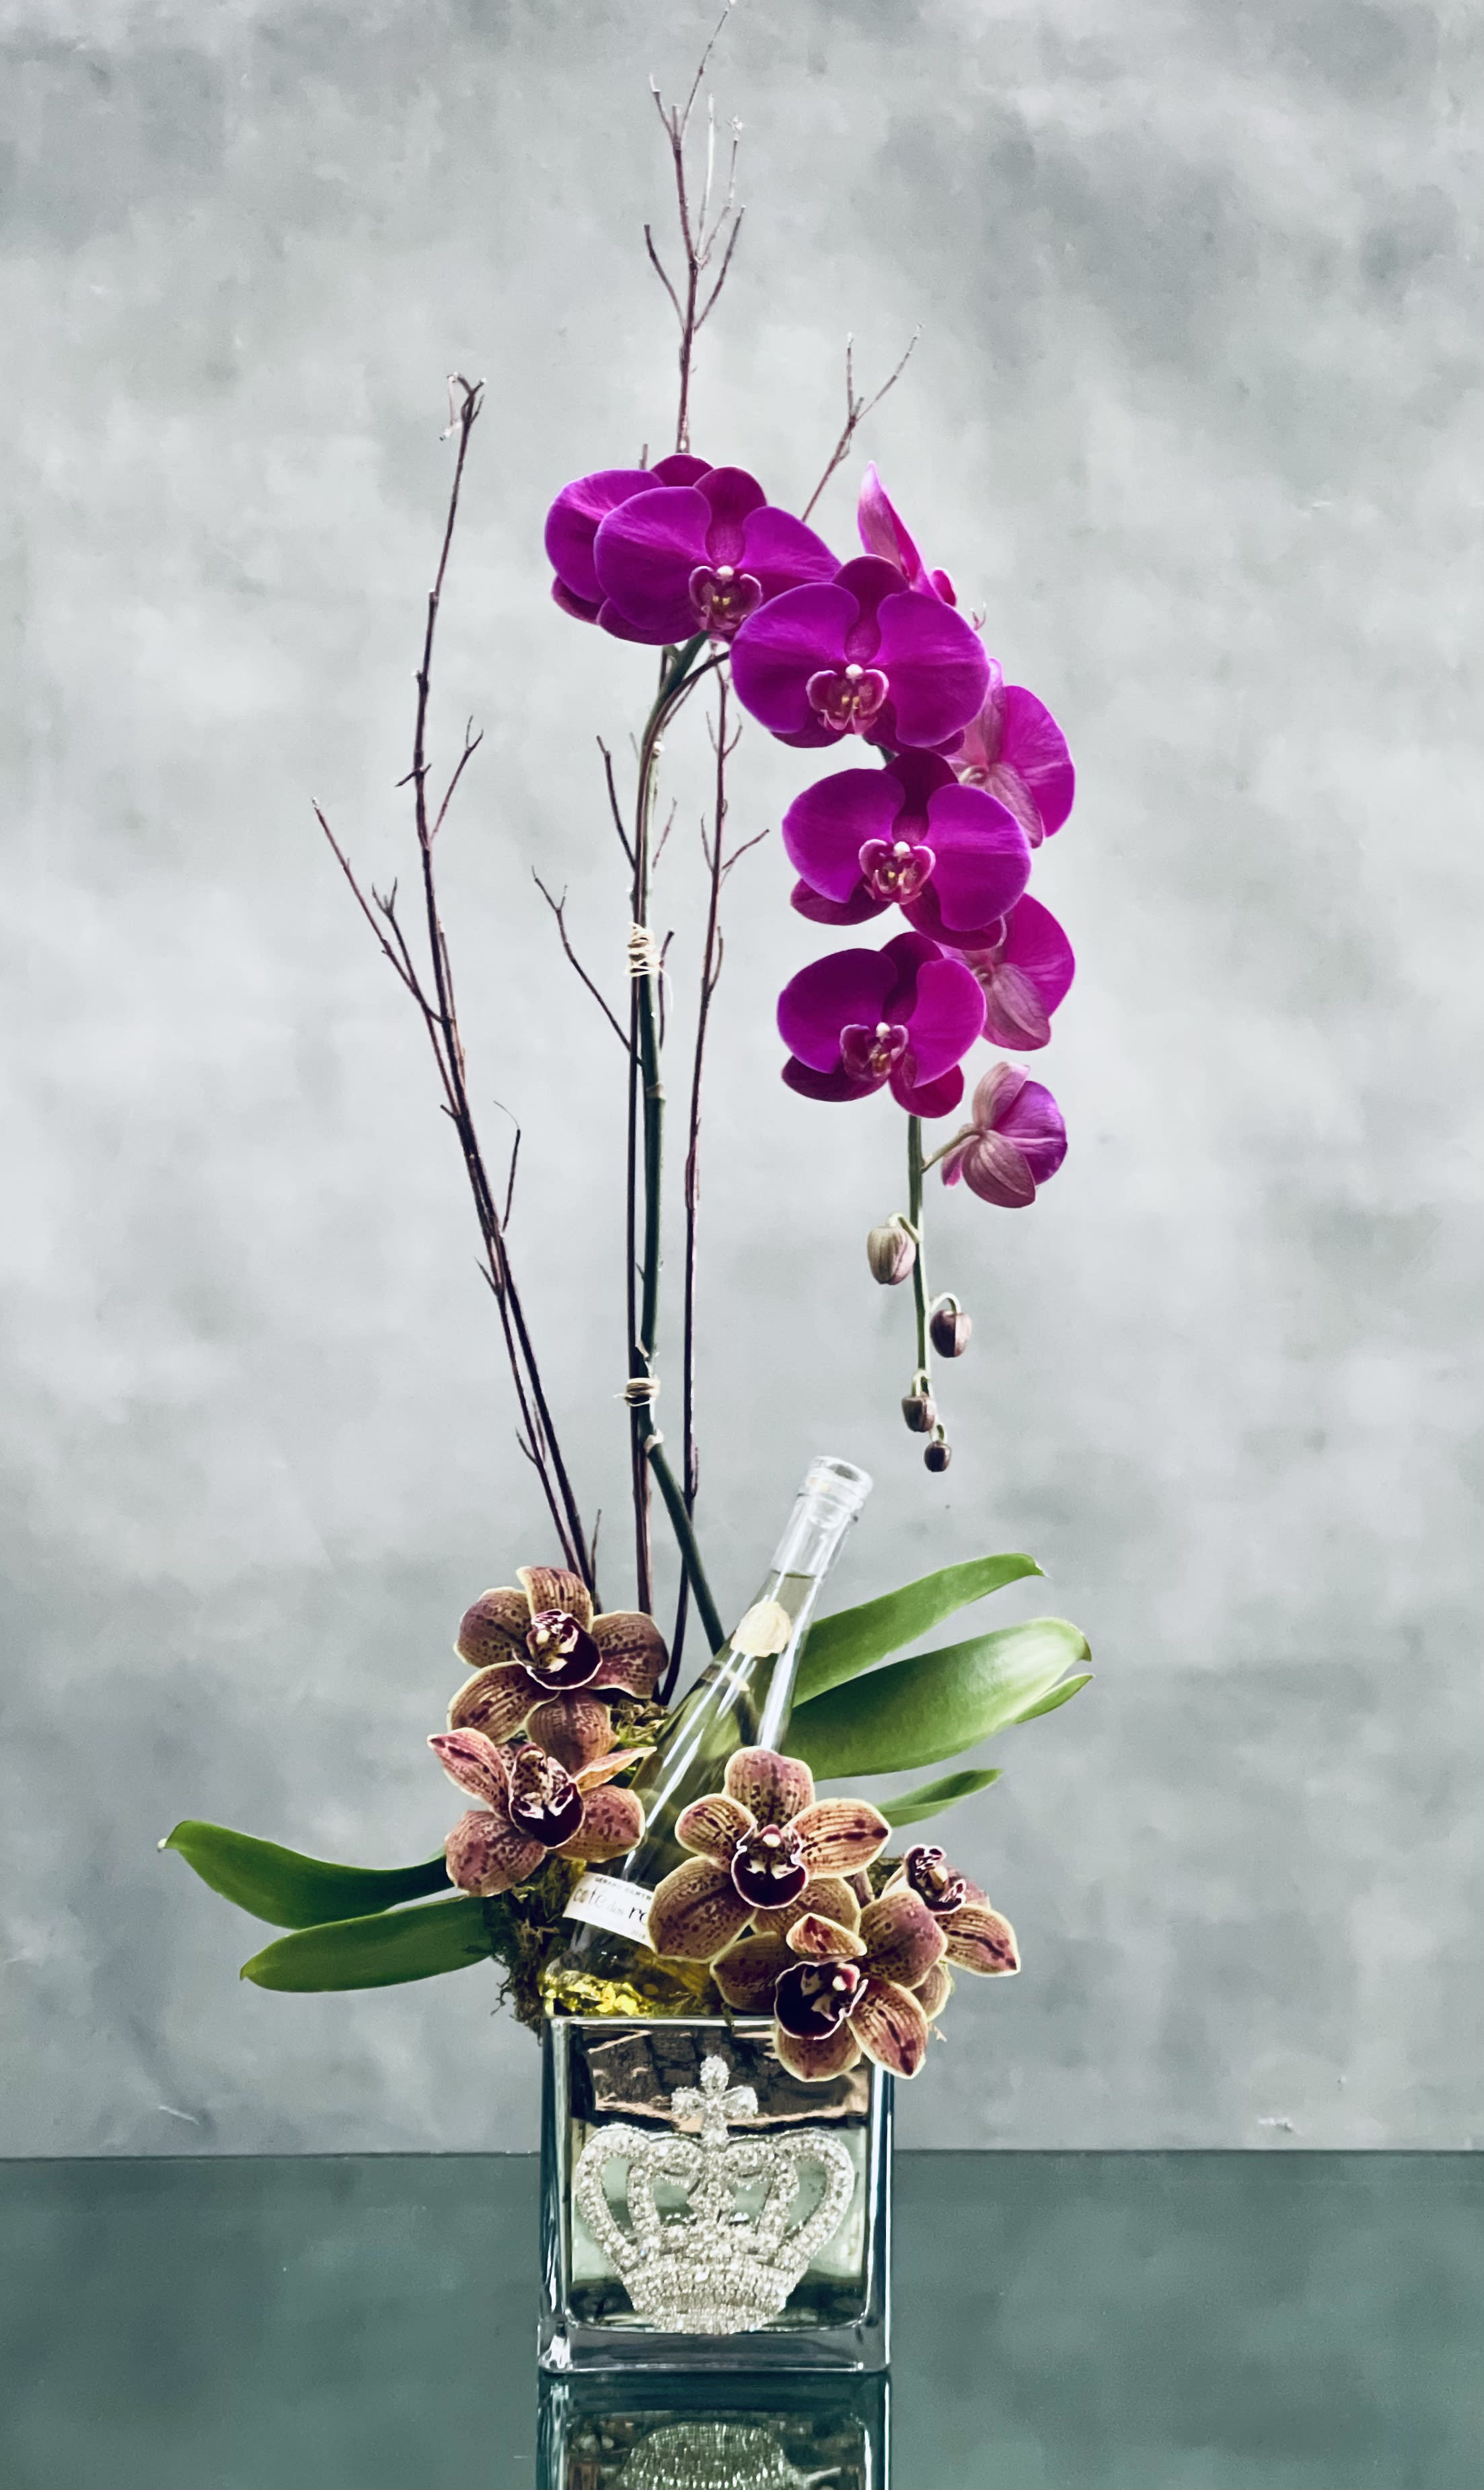 Duo Orchid Royale - Sherman Oaks Florist - This duo orchid arrangement with Amethyst cascading orchid, Cymbidium orchids and a half bottle Cotes de Roses Chardonnay are nested in a crown jeweled vase. Please note that Orchid color may differ depending on the season but it will still would have the purple hue. 